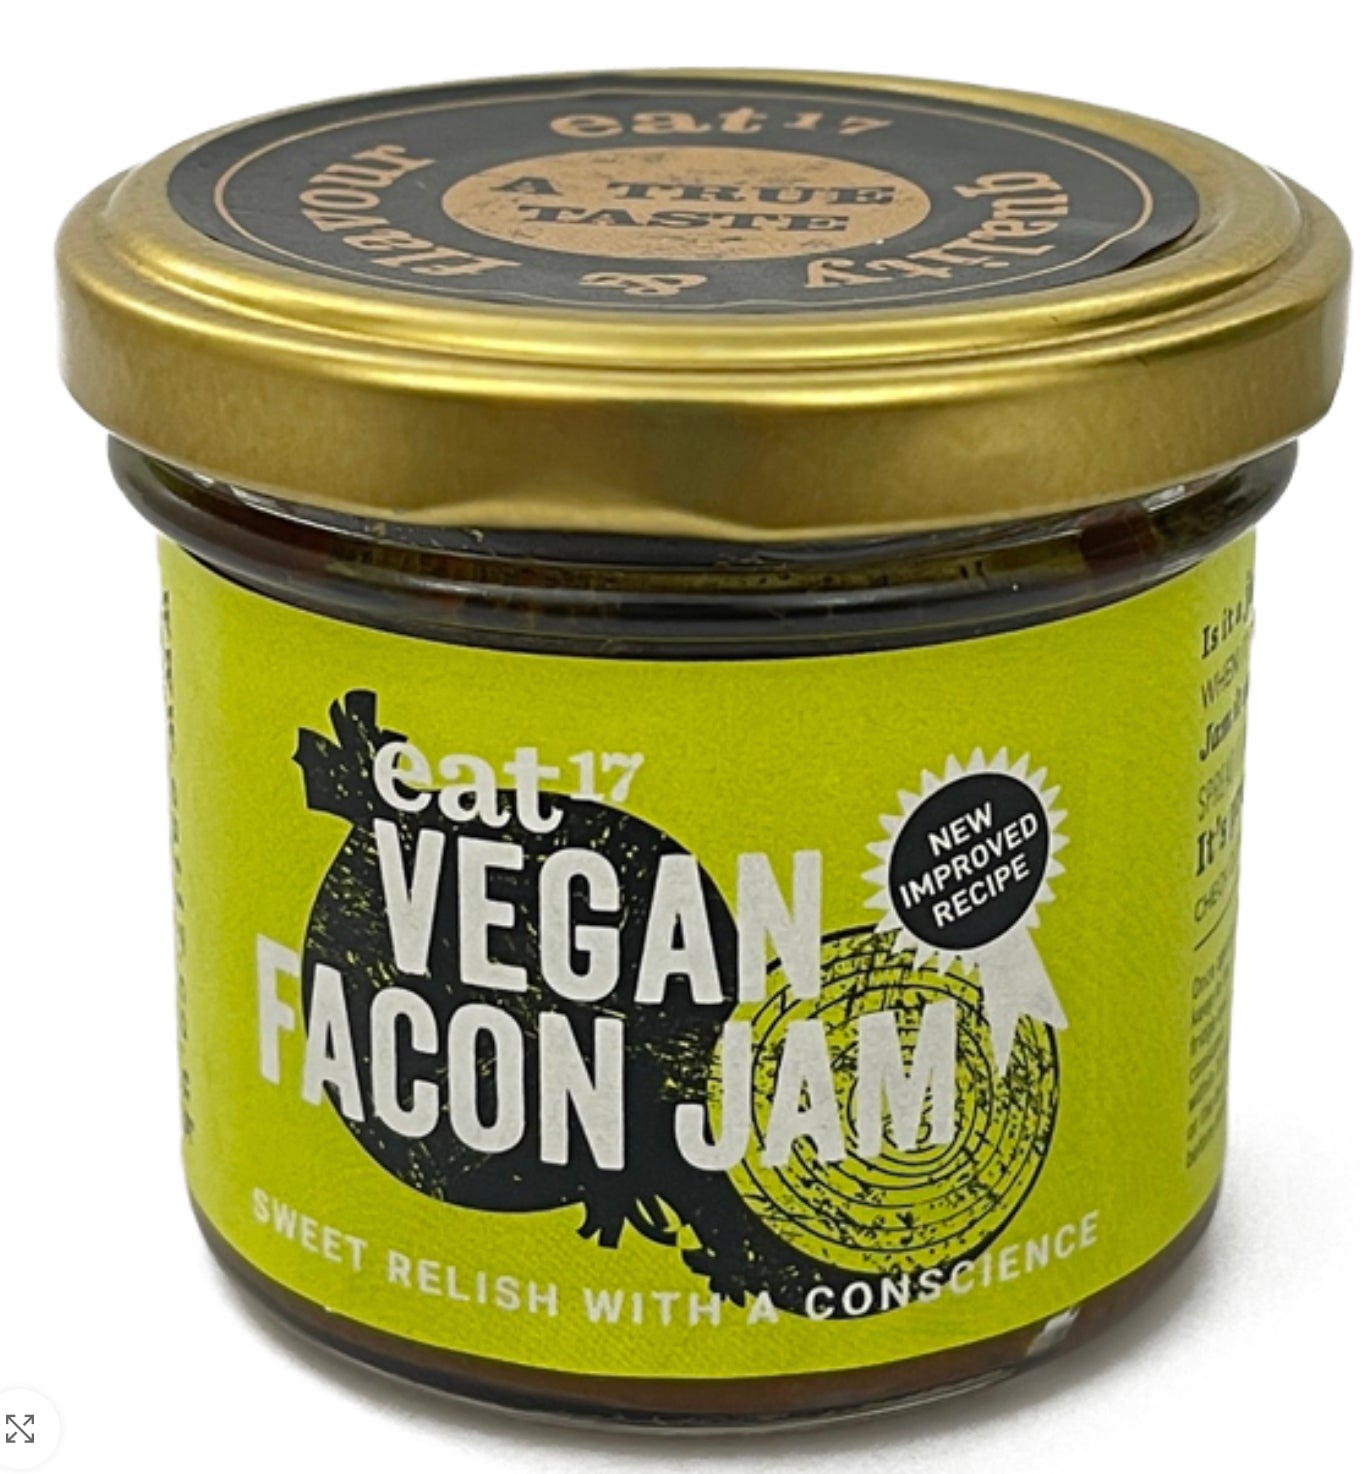 Eat17 - vegan facon jam (sticky onion marmalade, great with 🍔) -  105g